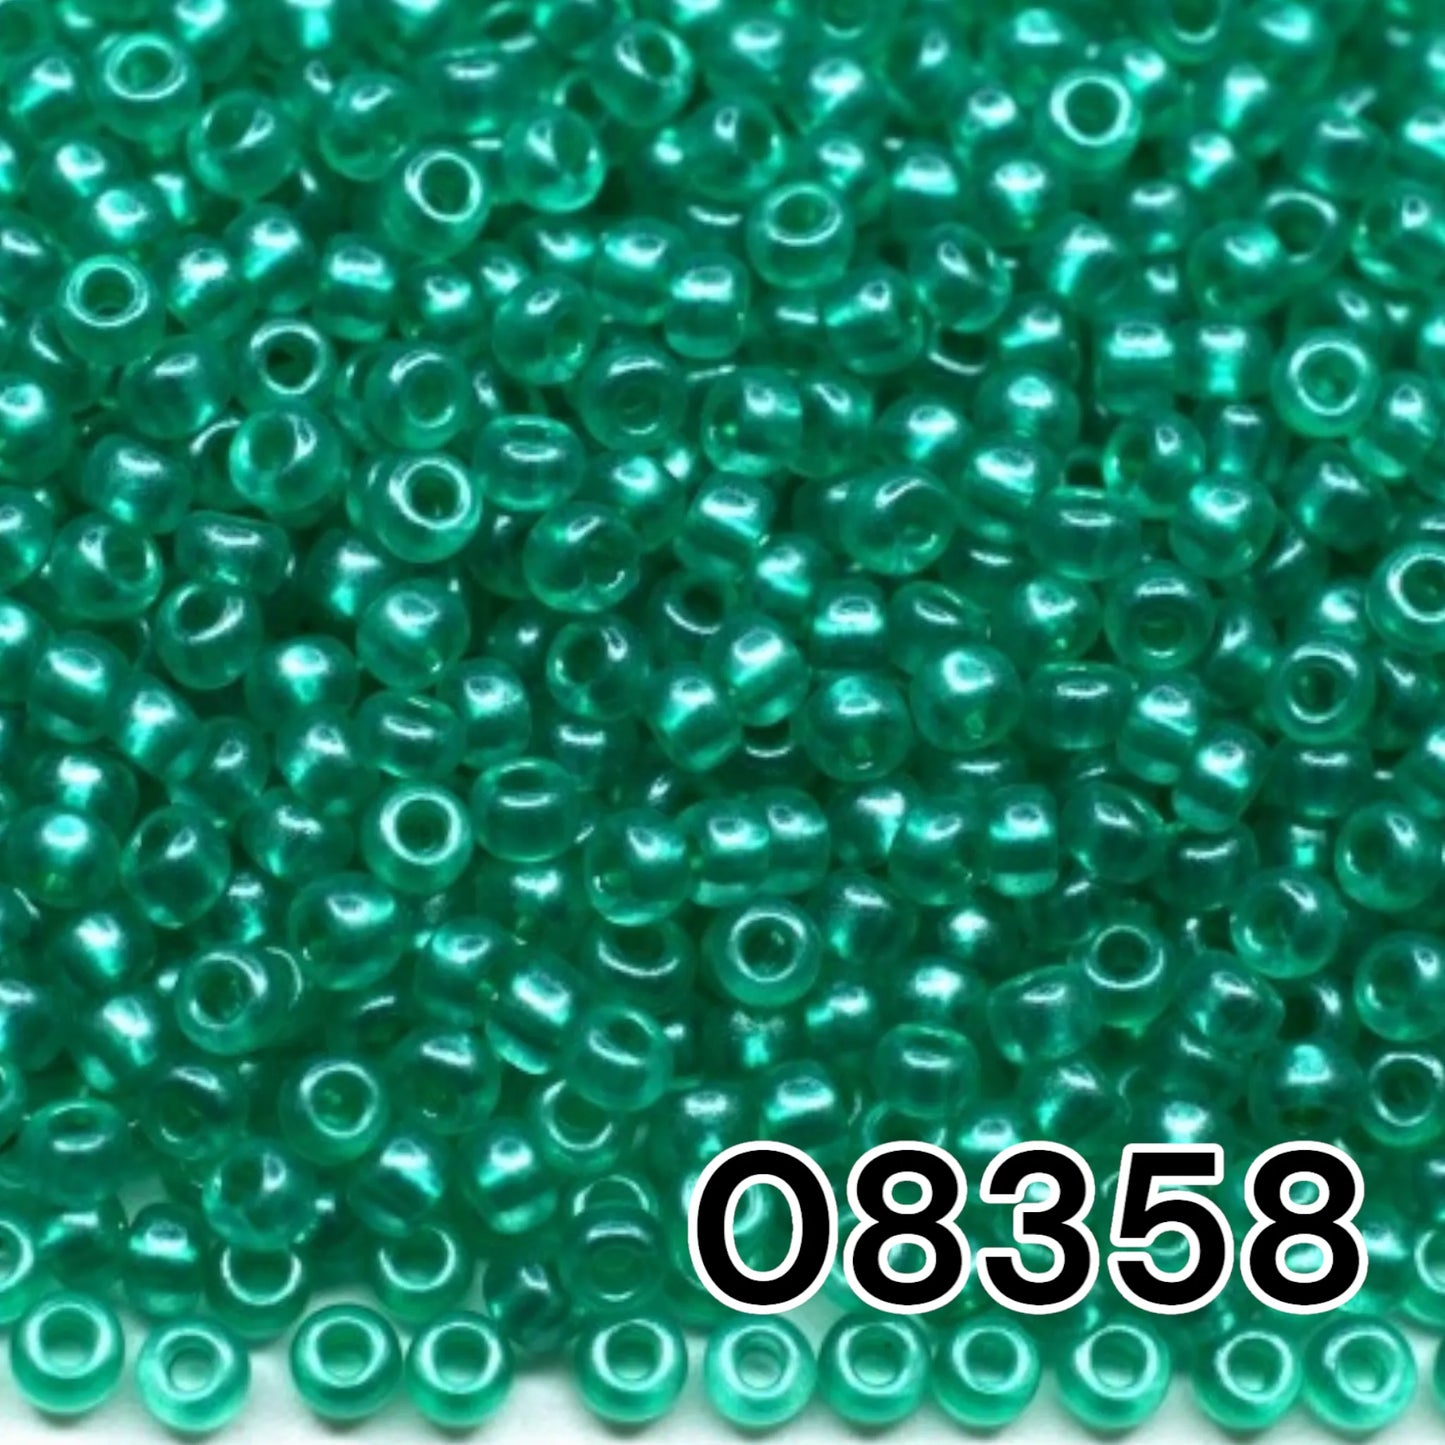 08358 Czech seed beads PRECIOSA Rocailles 10/0 turquoise. Crystal - Terra Pearl.